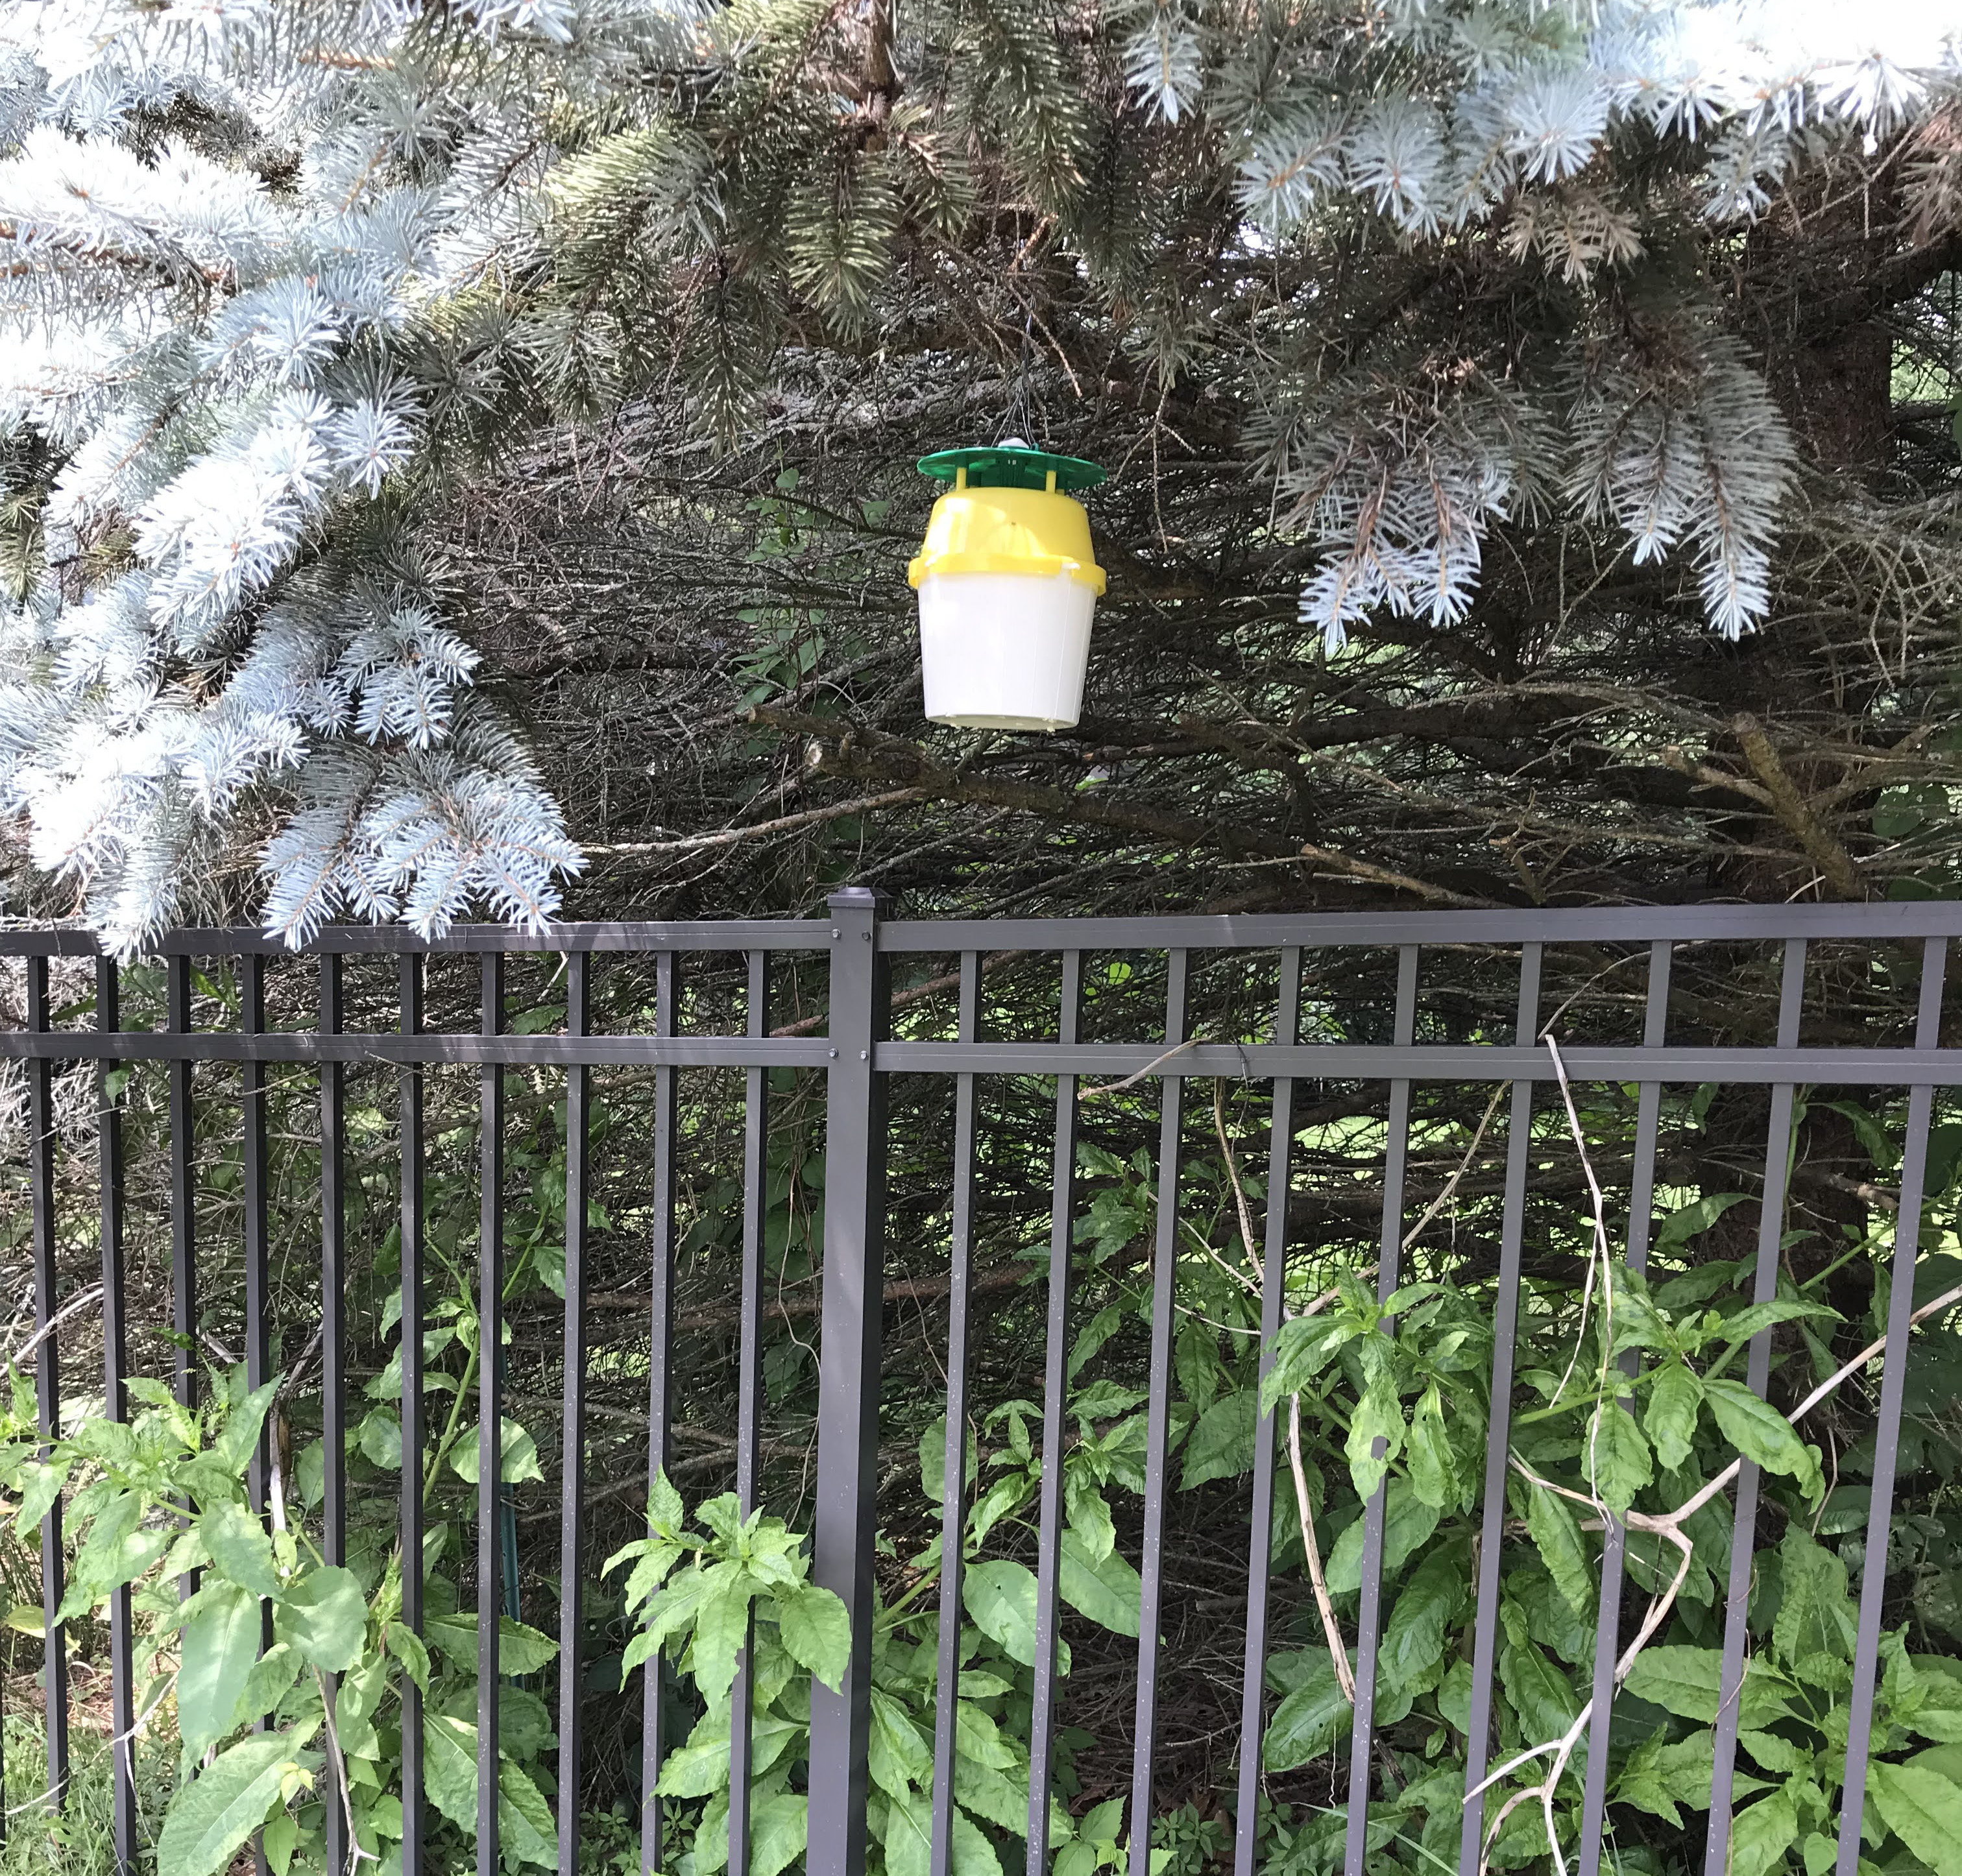 A yellow bucket trap hanging from a tree above boxwood plants.